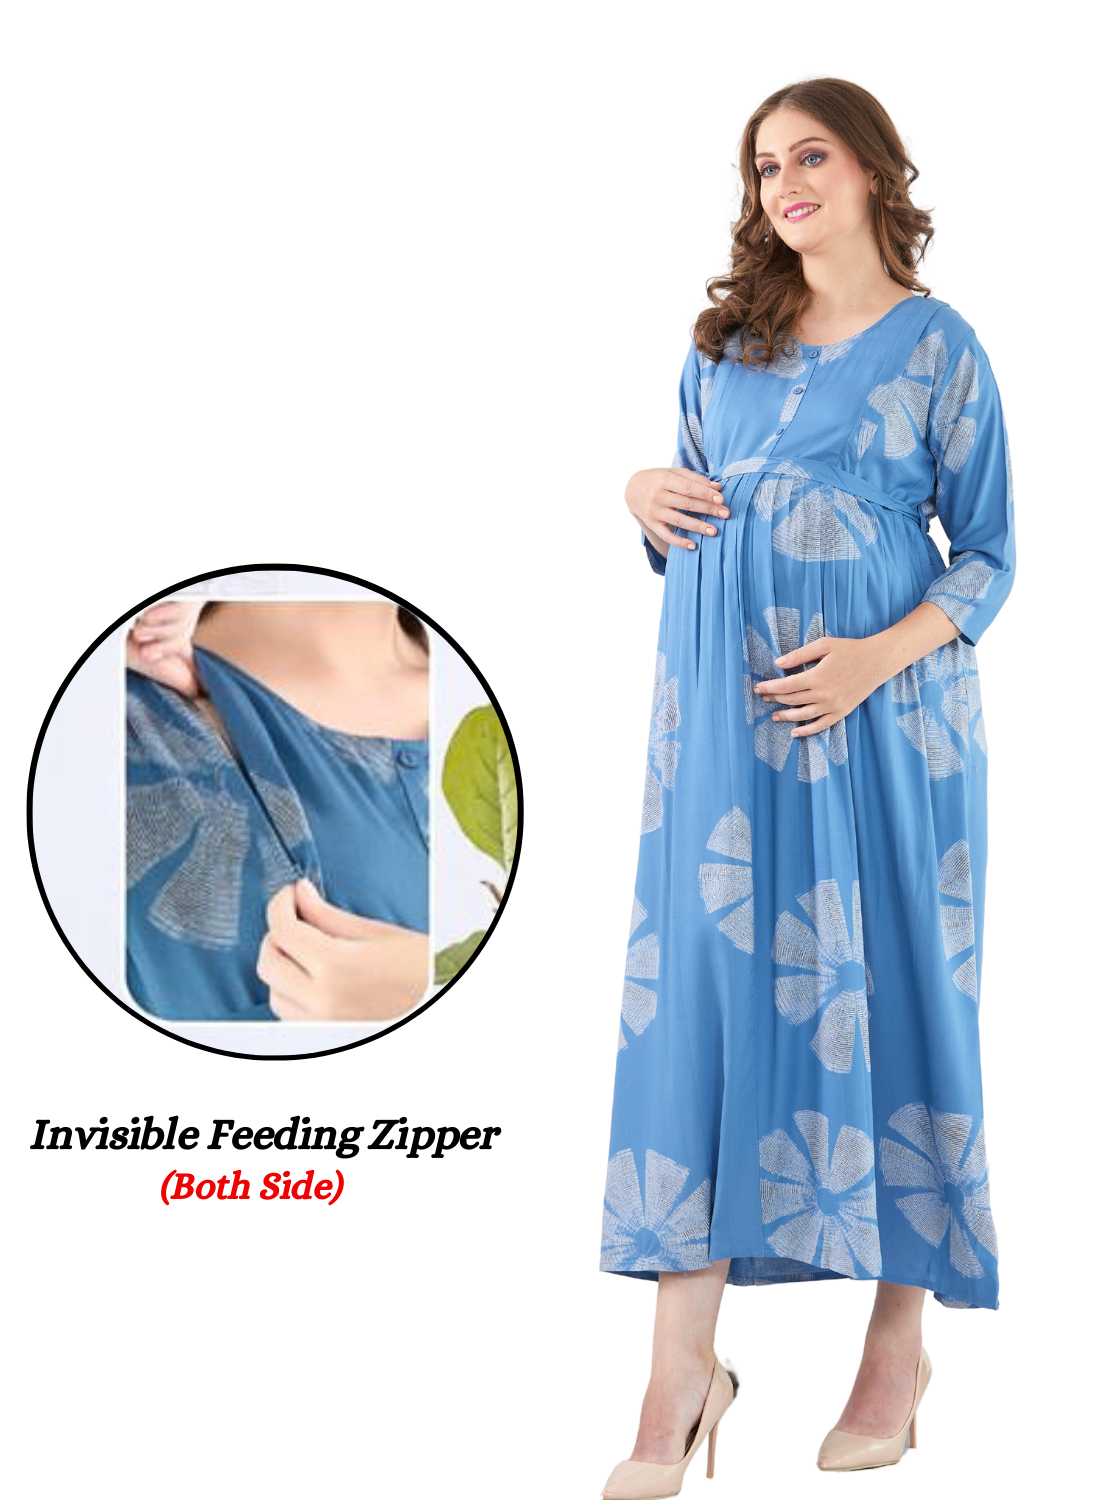 Top 29 Summer Maternity Dresses - Chaylor & Mads